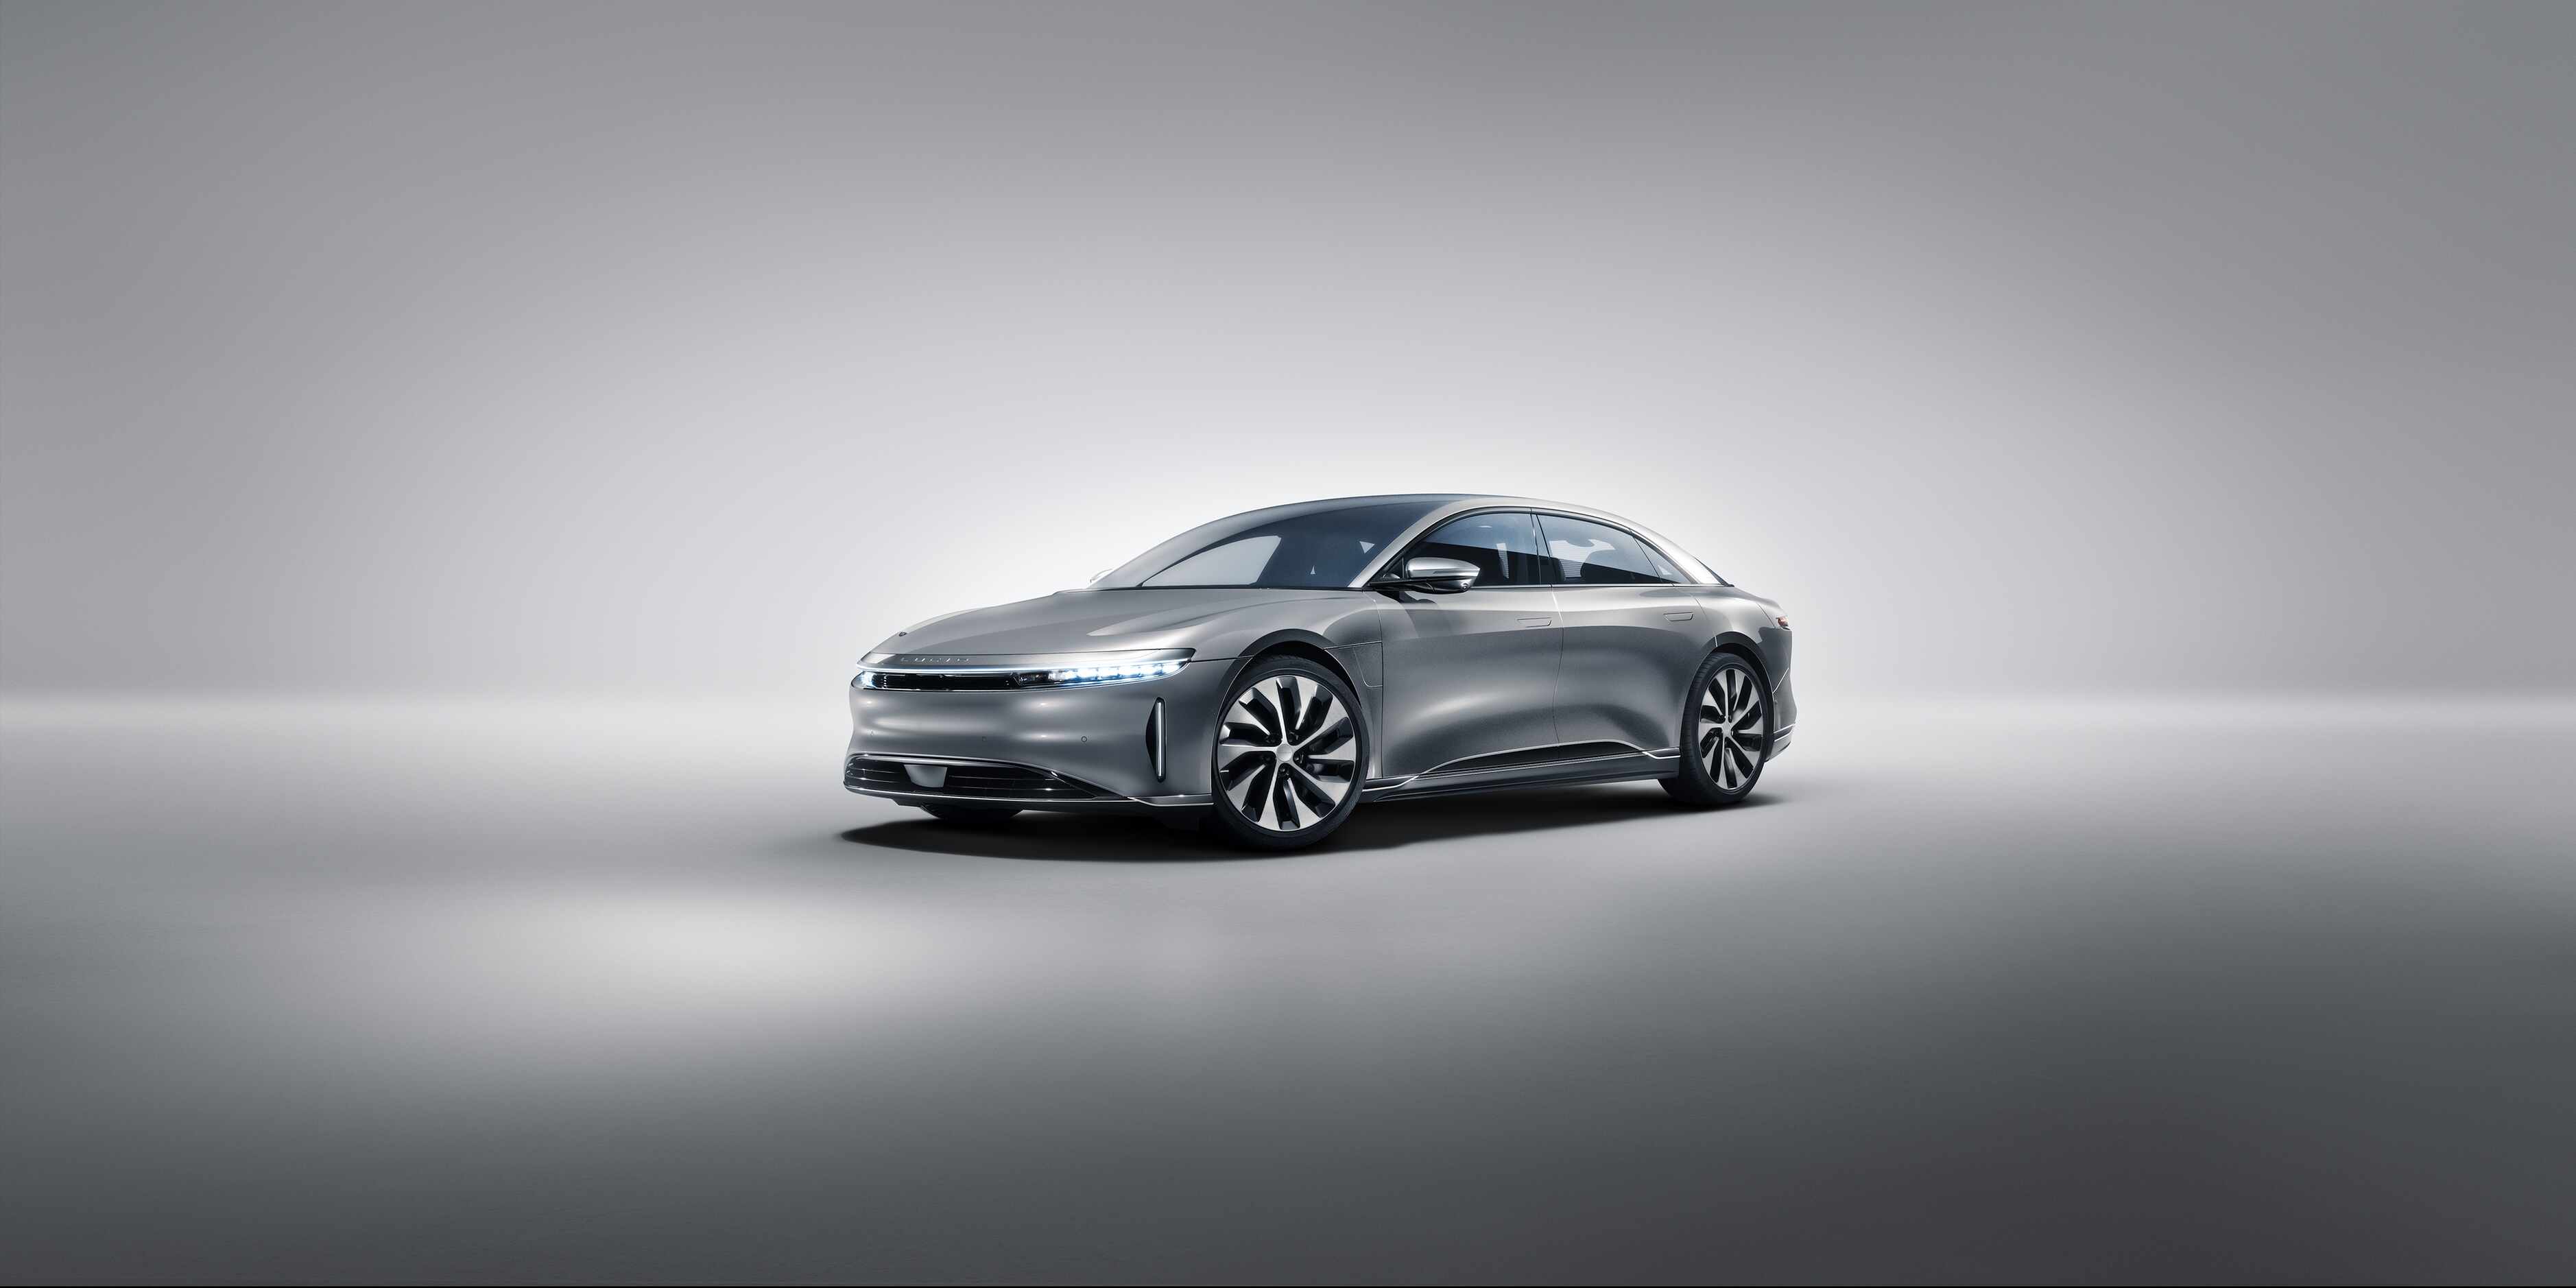 The Lucid Air Grand Touring